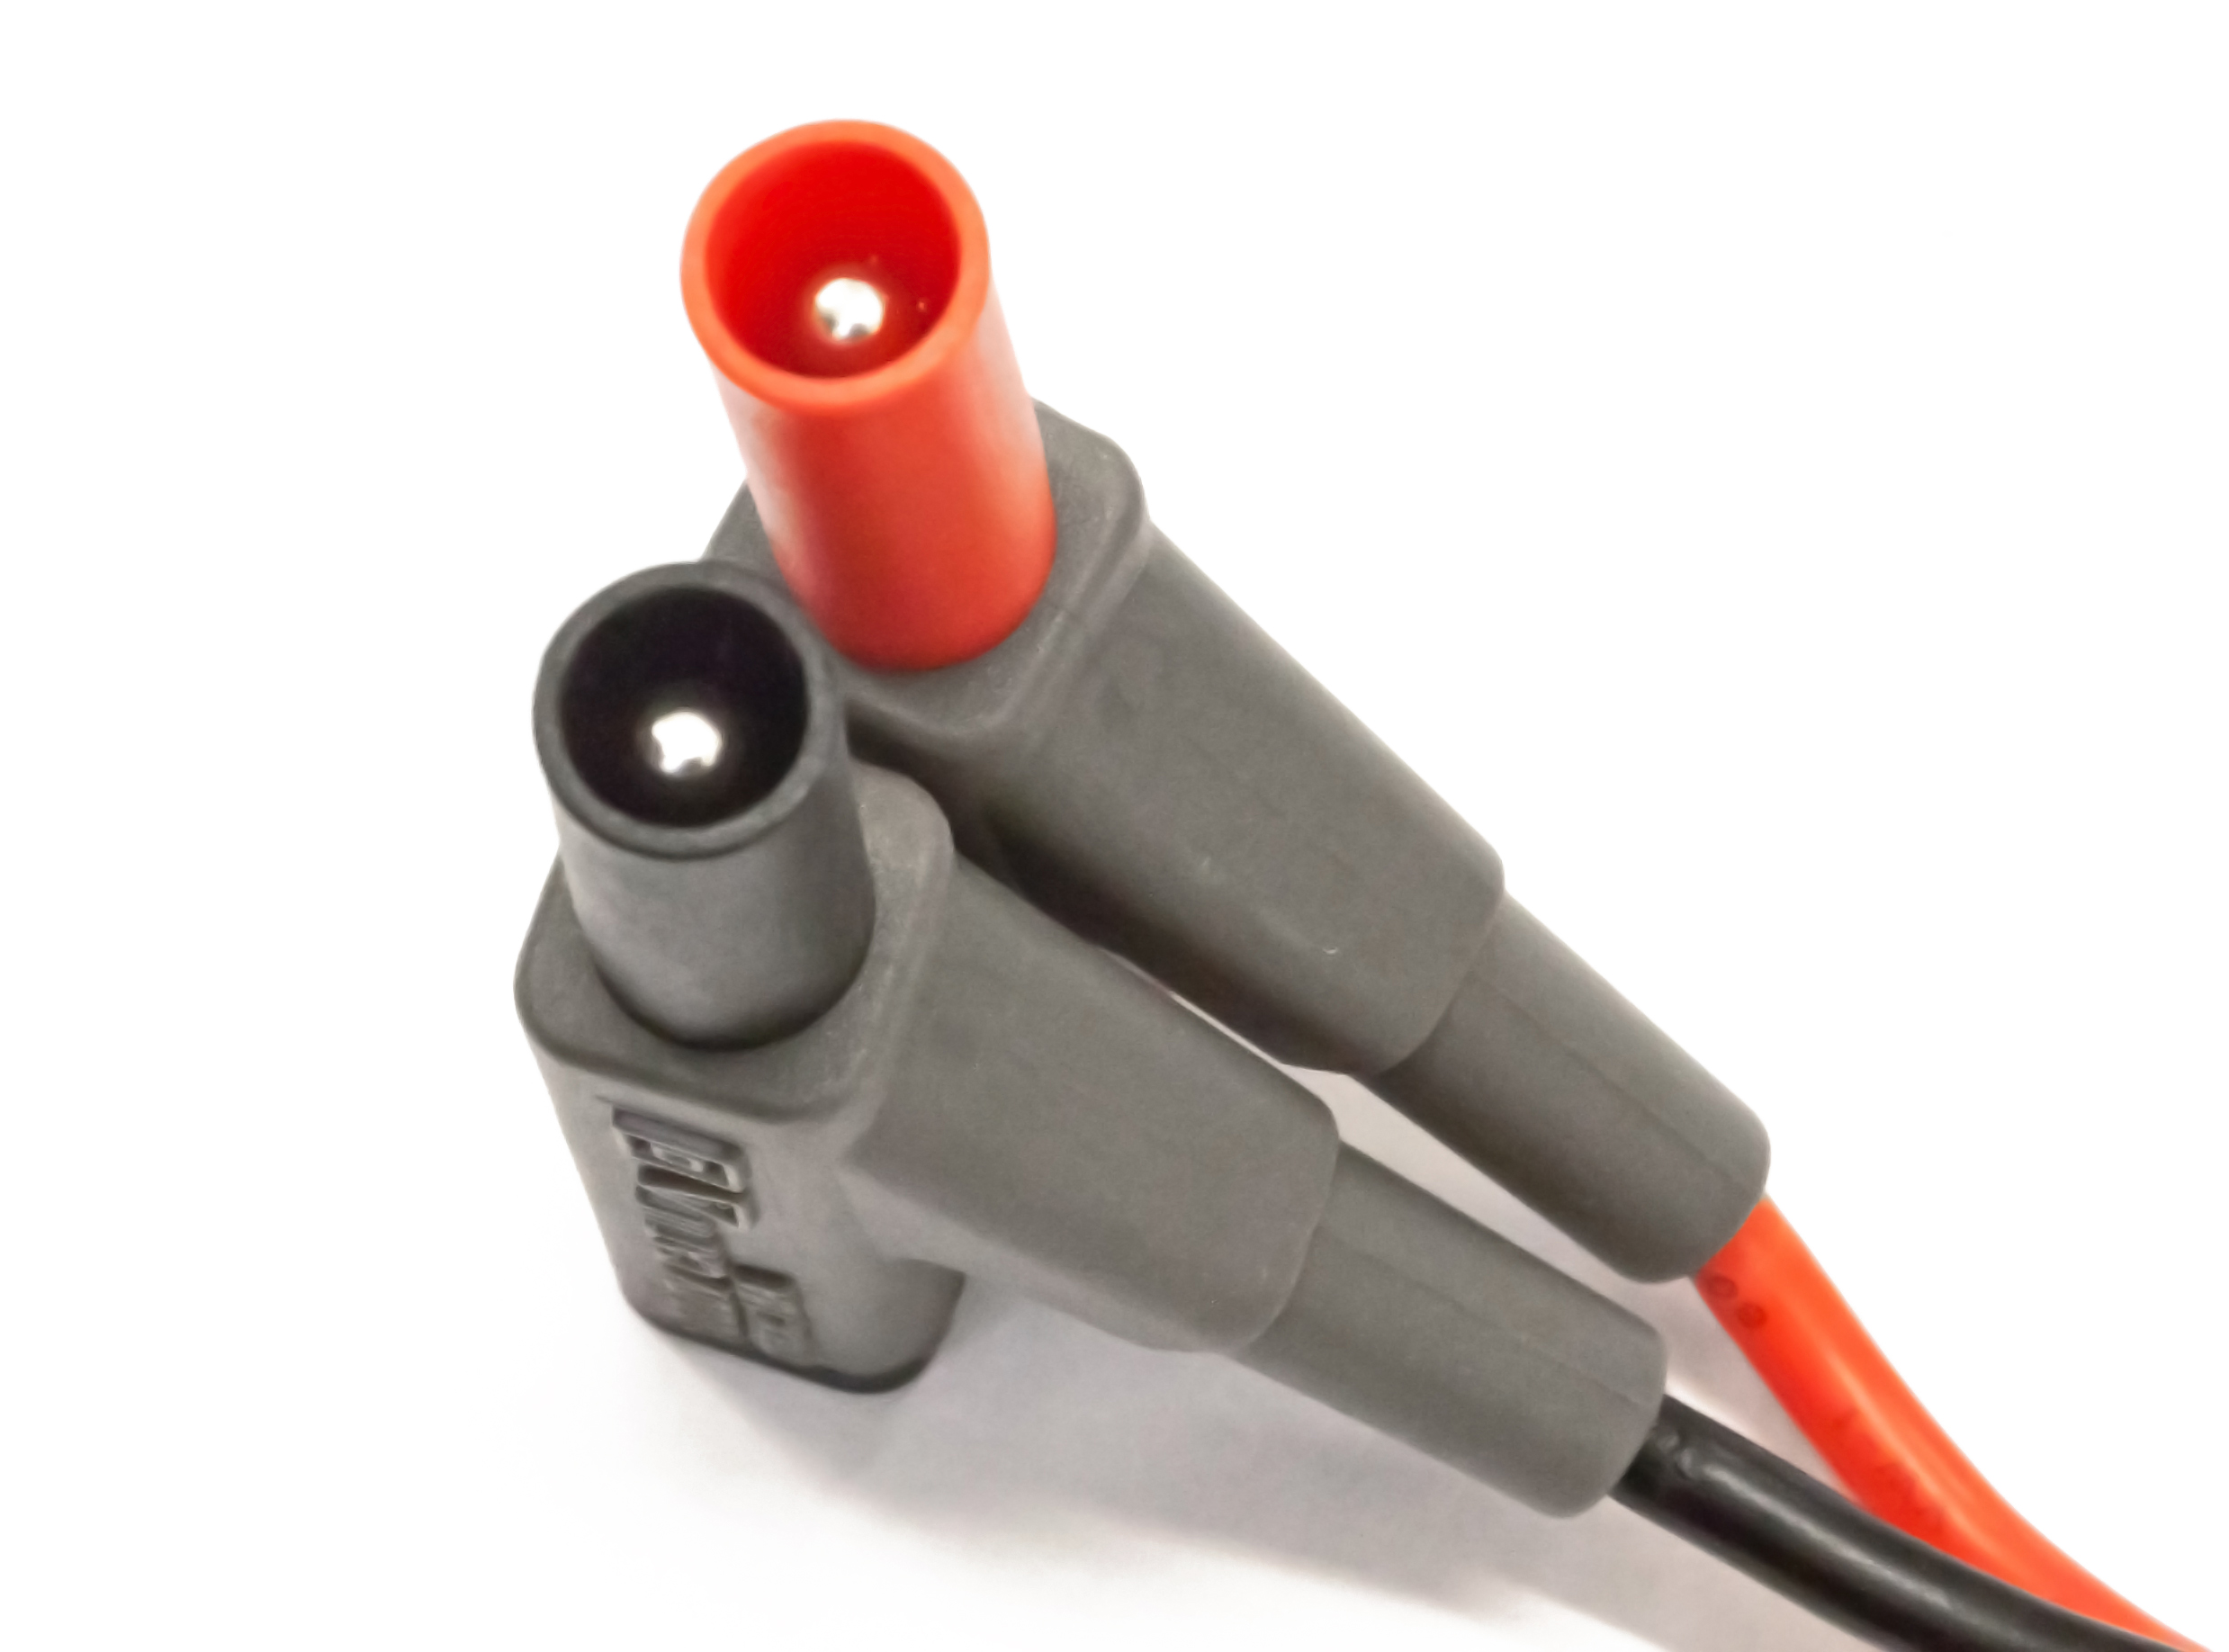 «PeakTech® P 7025» Test Leads for Digital Multimeter with coupling